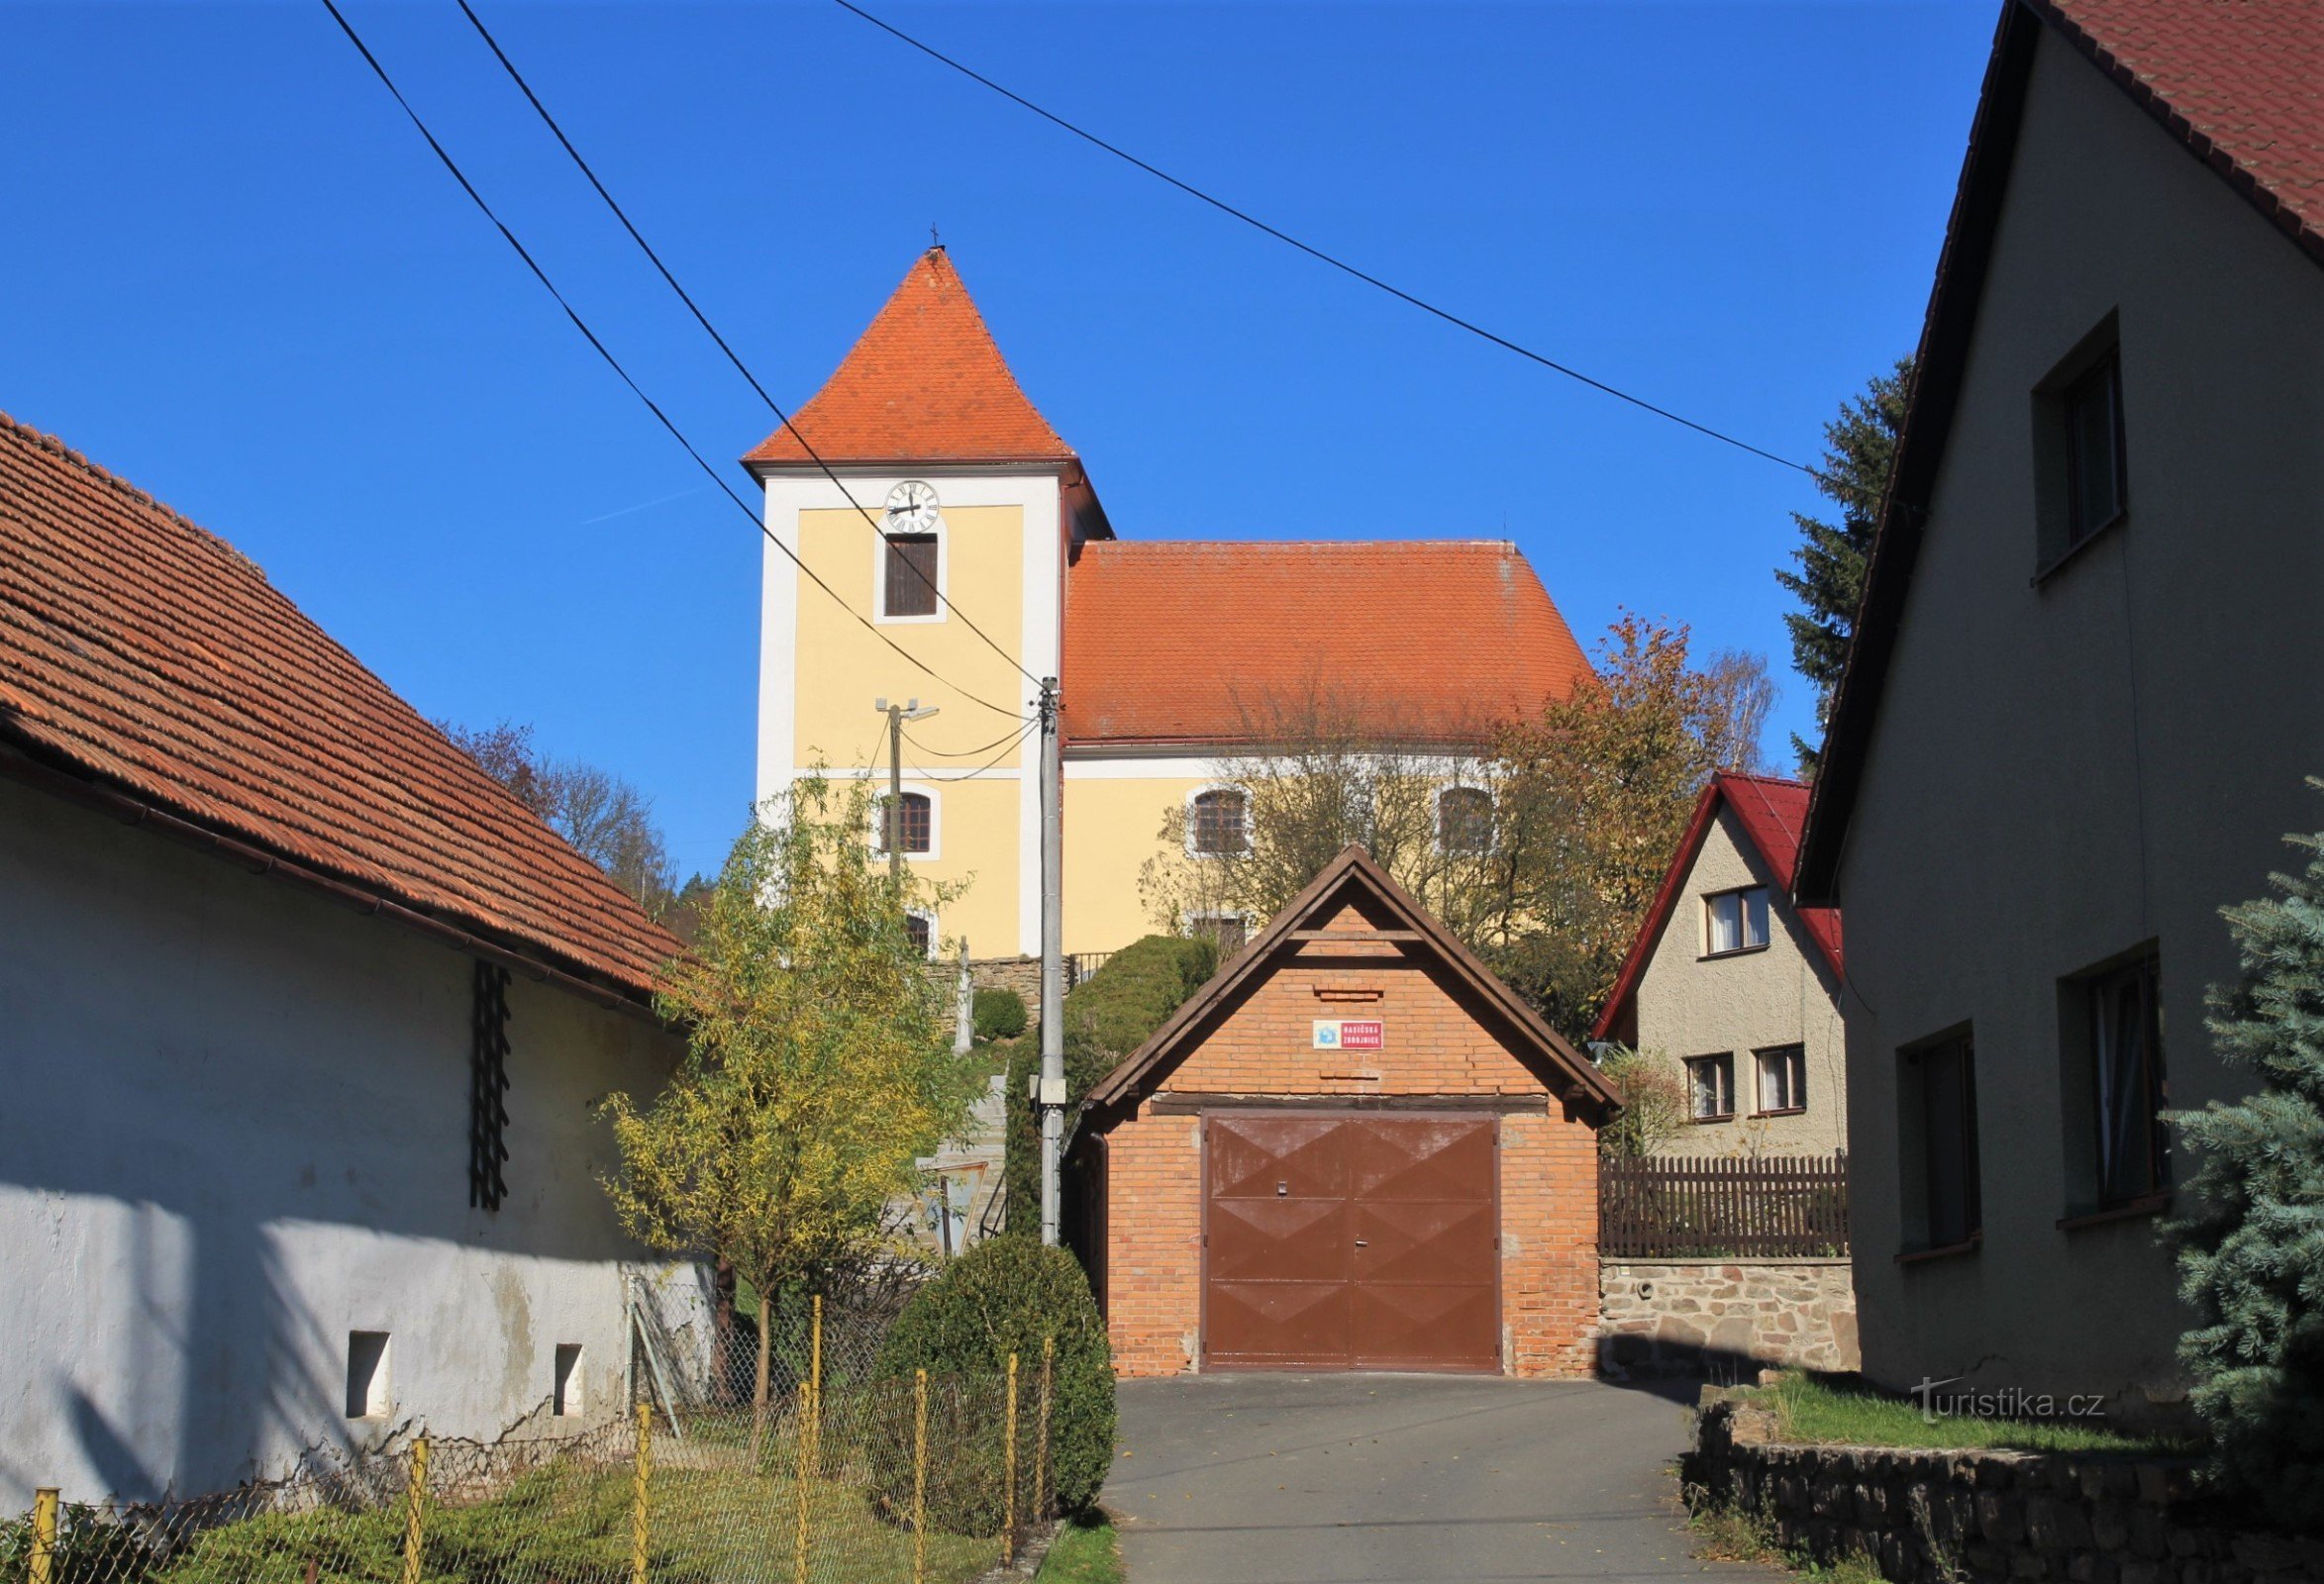 View of the church from the village